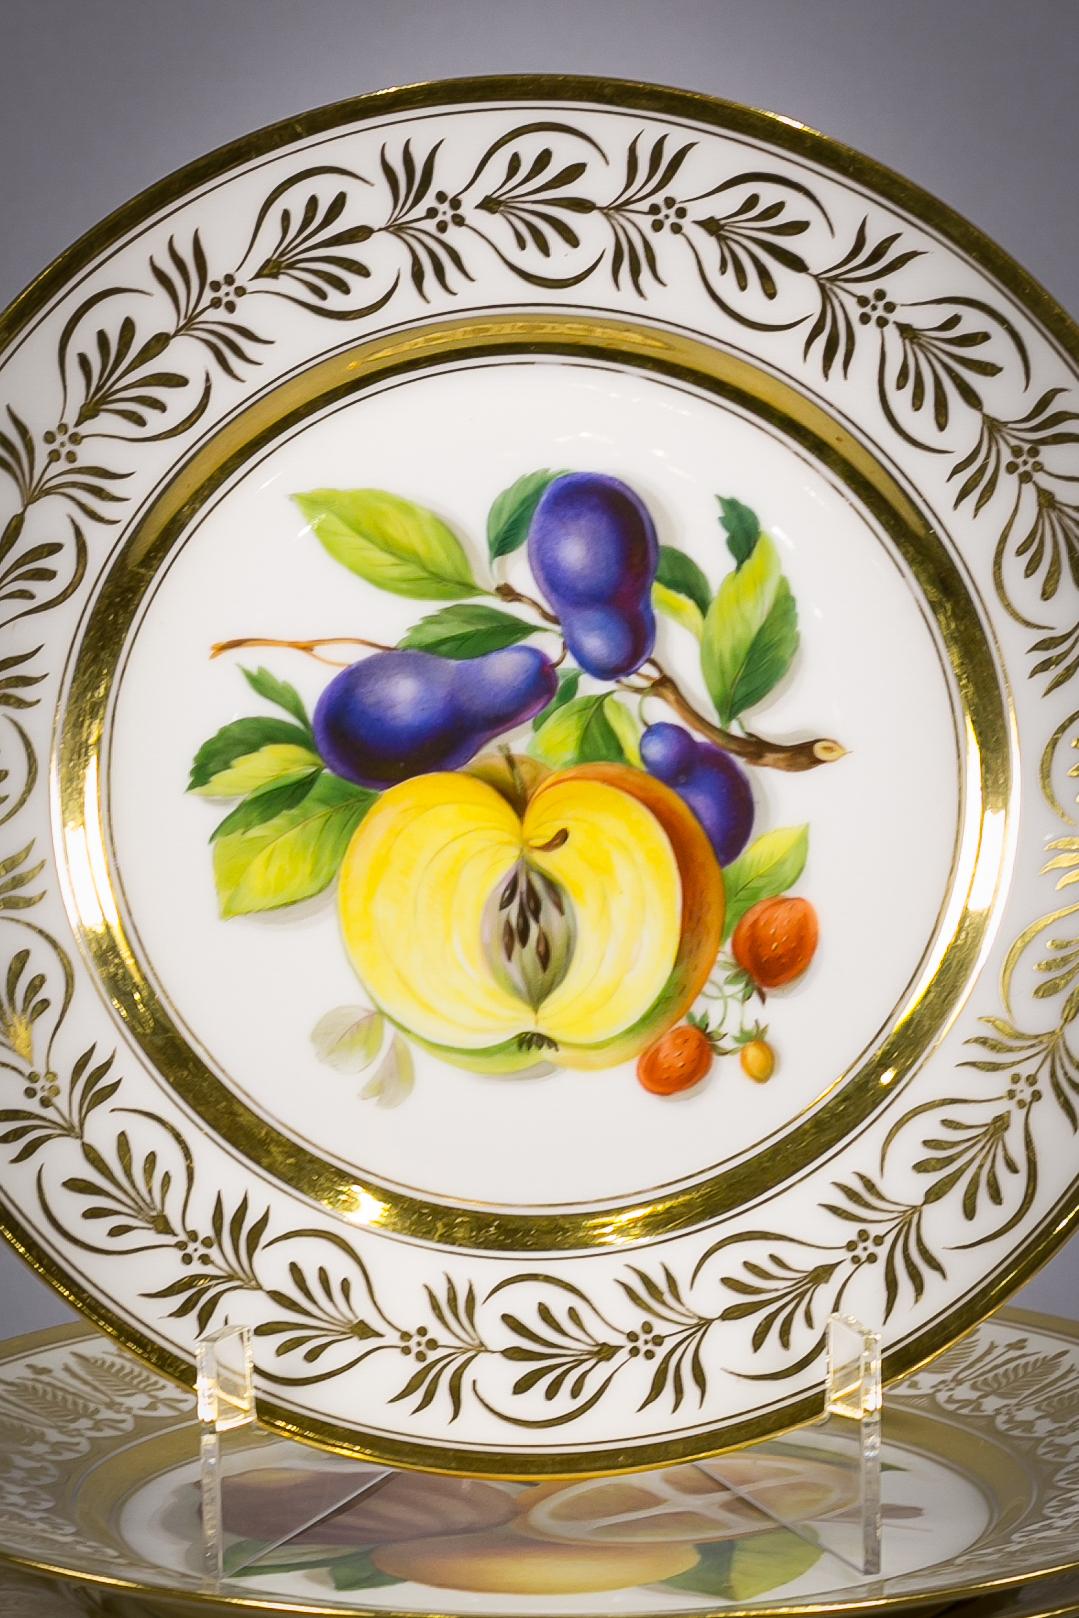 Each painted with different arrangements of fruits with harlequin borders in gilt, circa 1900.